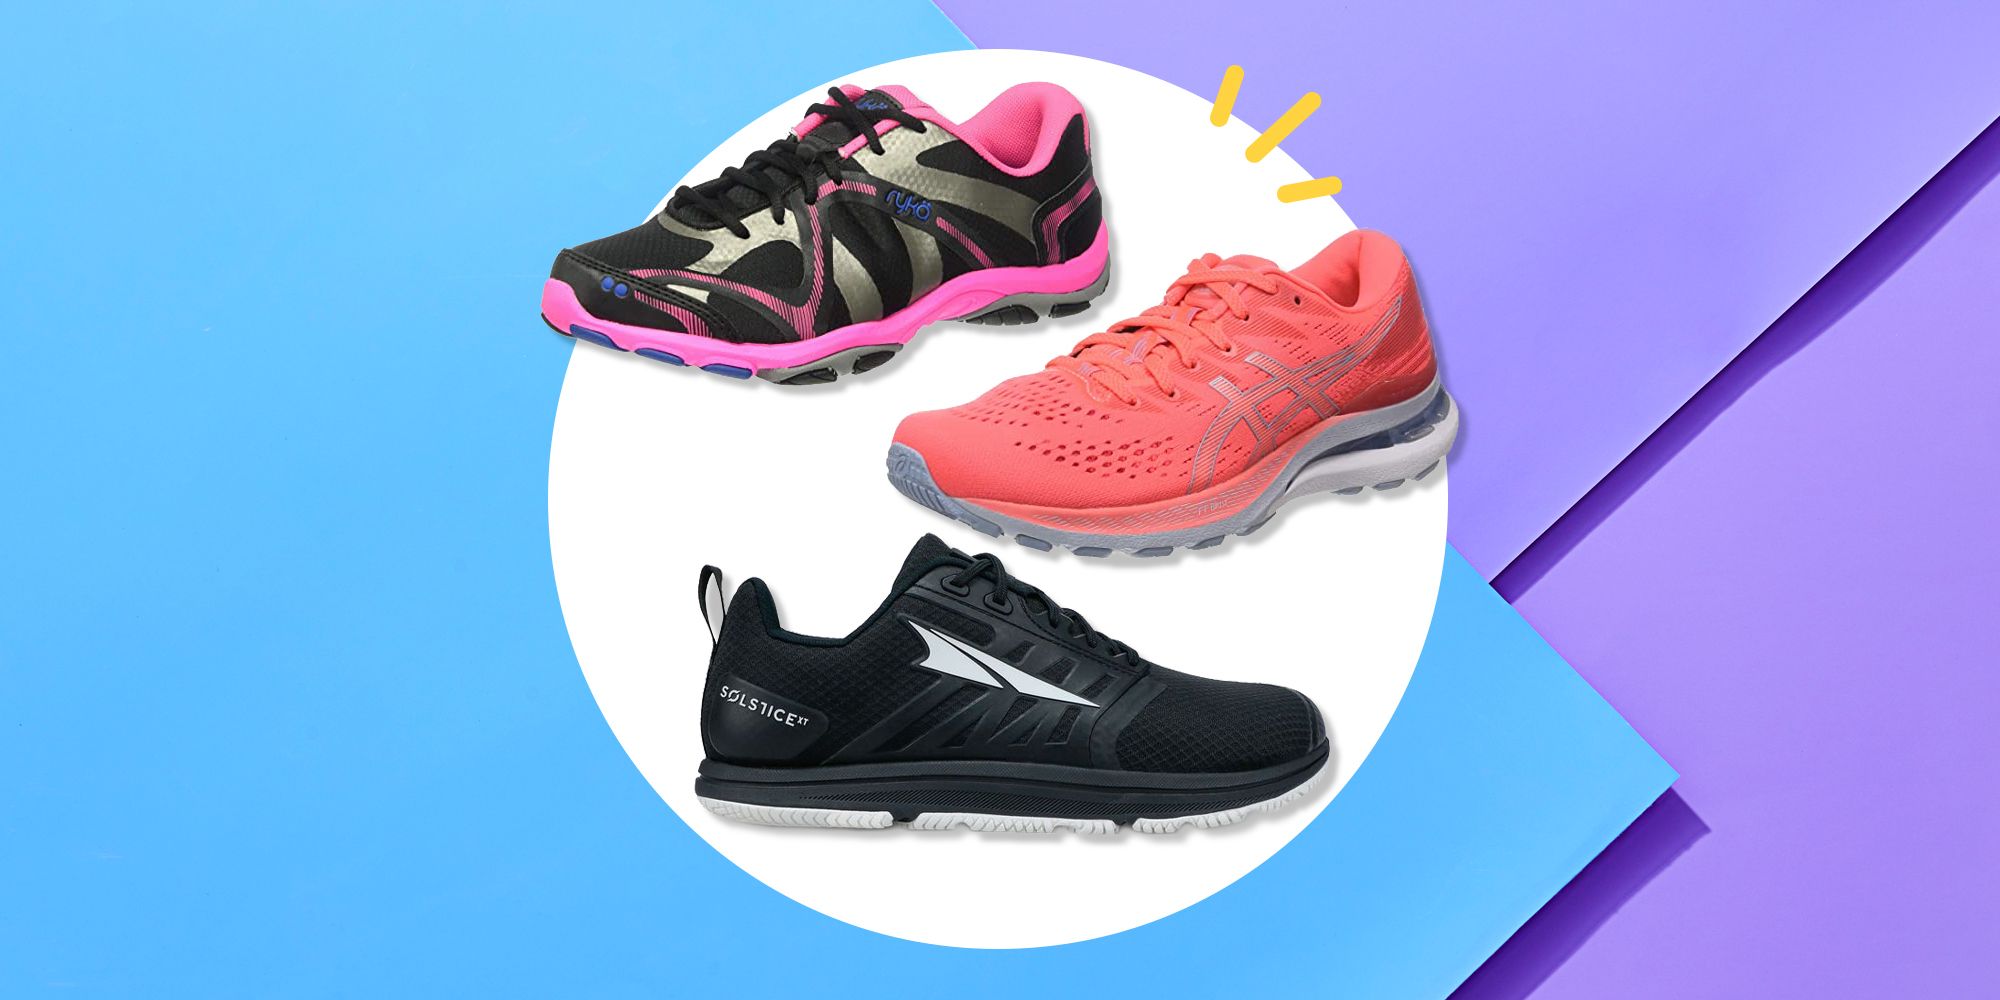 mikrofon Civic Ruddy 20 Best Workout Shoes For Women Of 2023, According To A Podiatrist